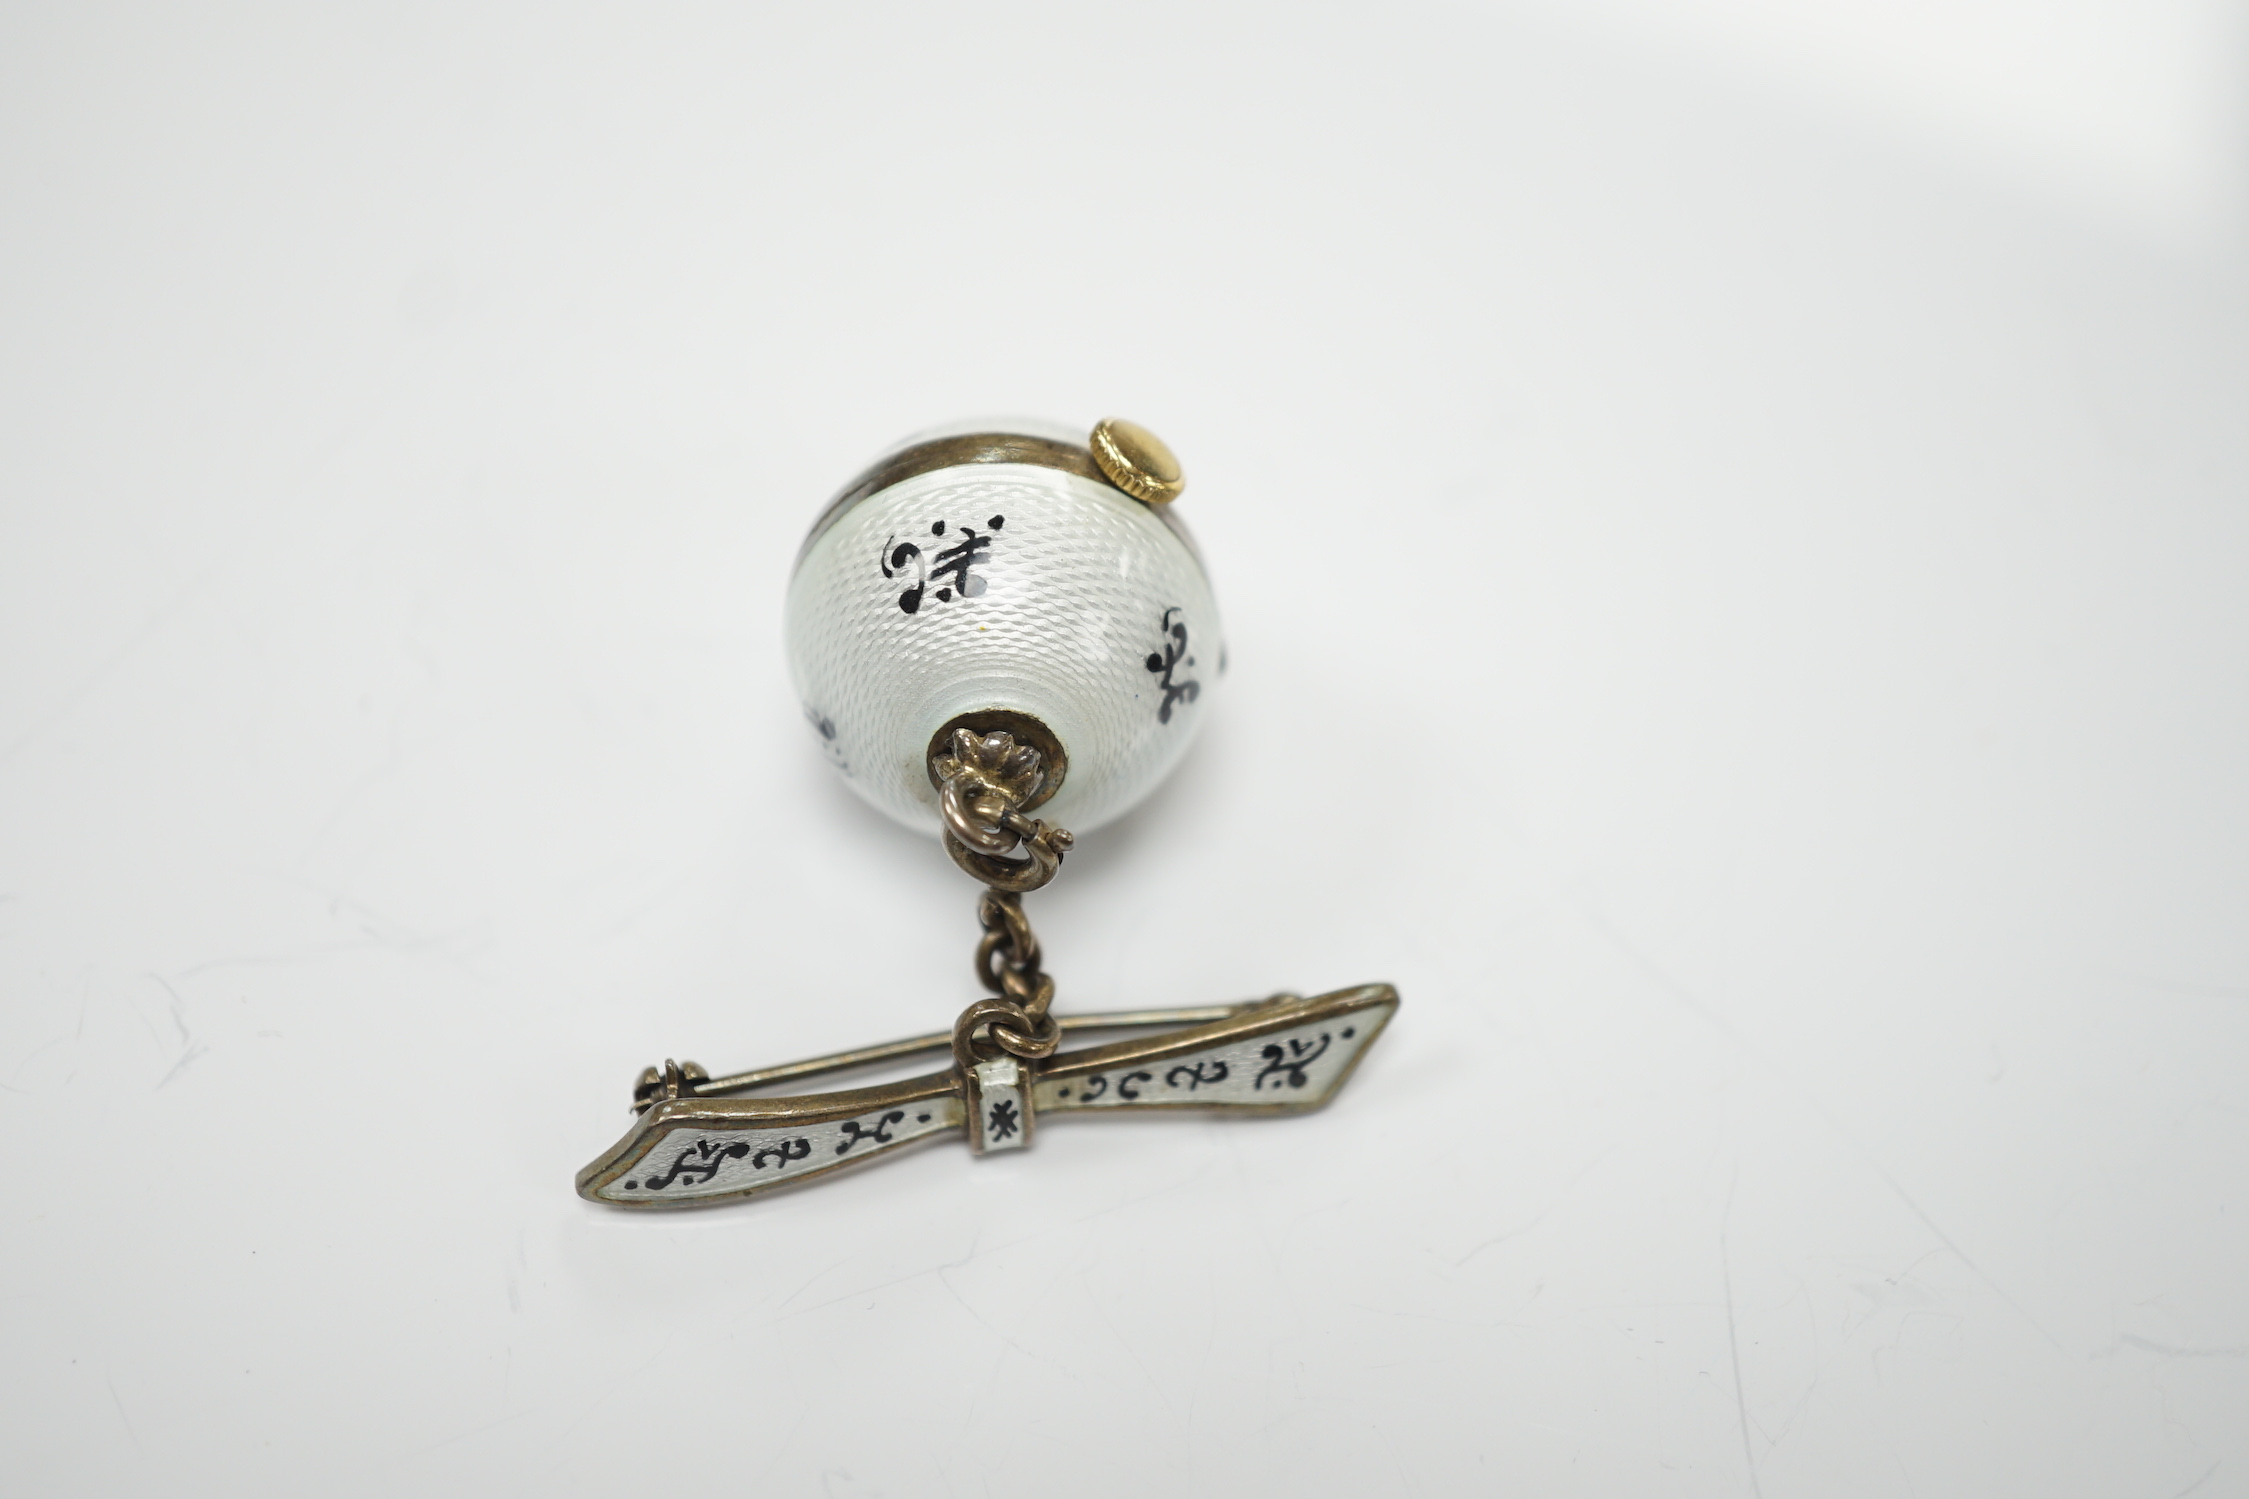 An early to mid 20th century silver and two colour enamel globe pendant watch, on suspension chain with brooch attachment, diameter 20mm.